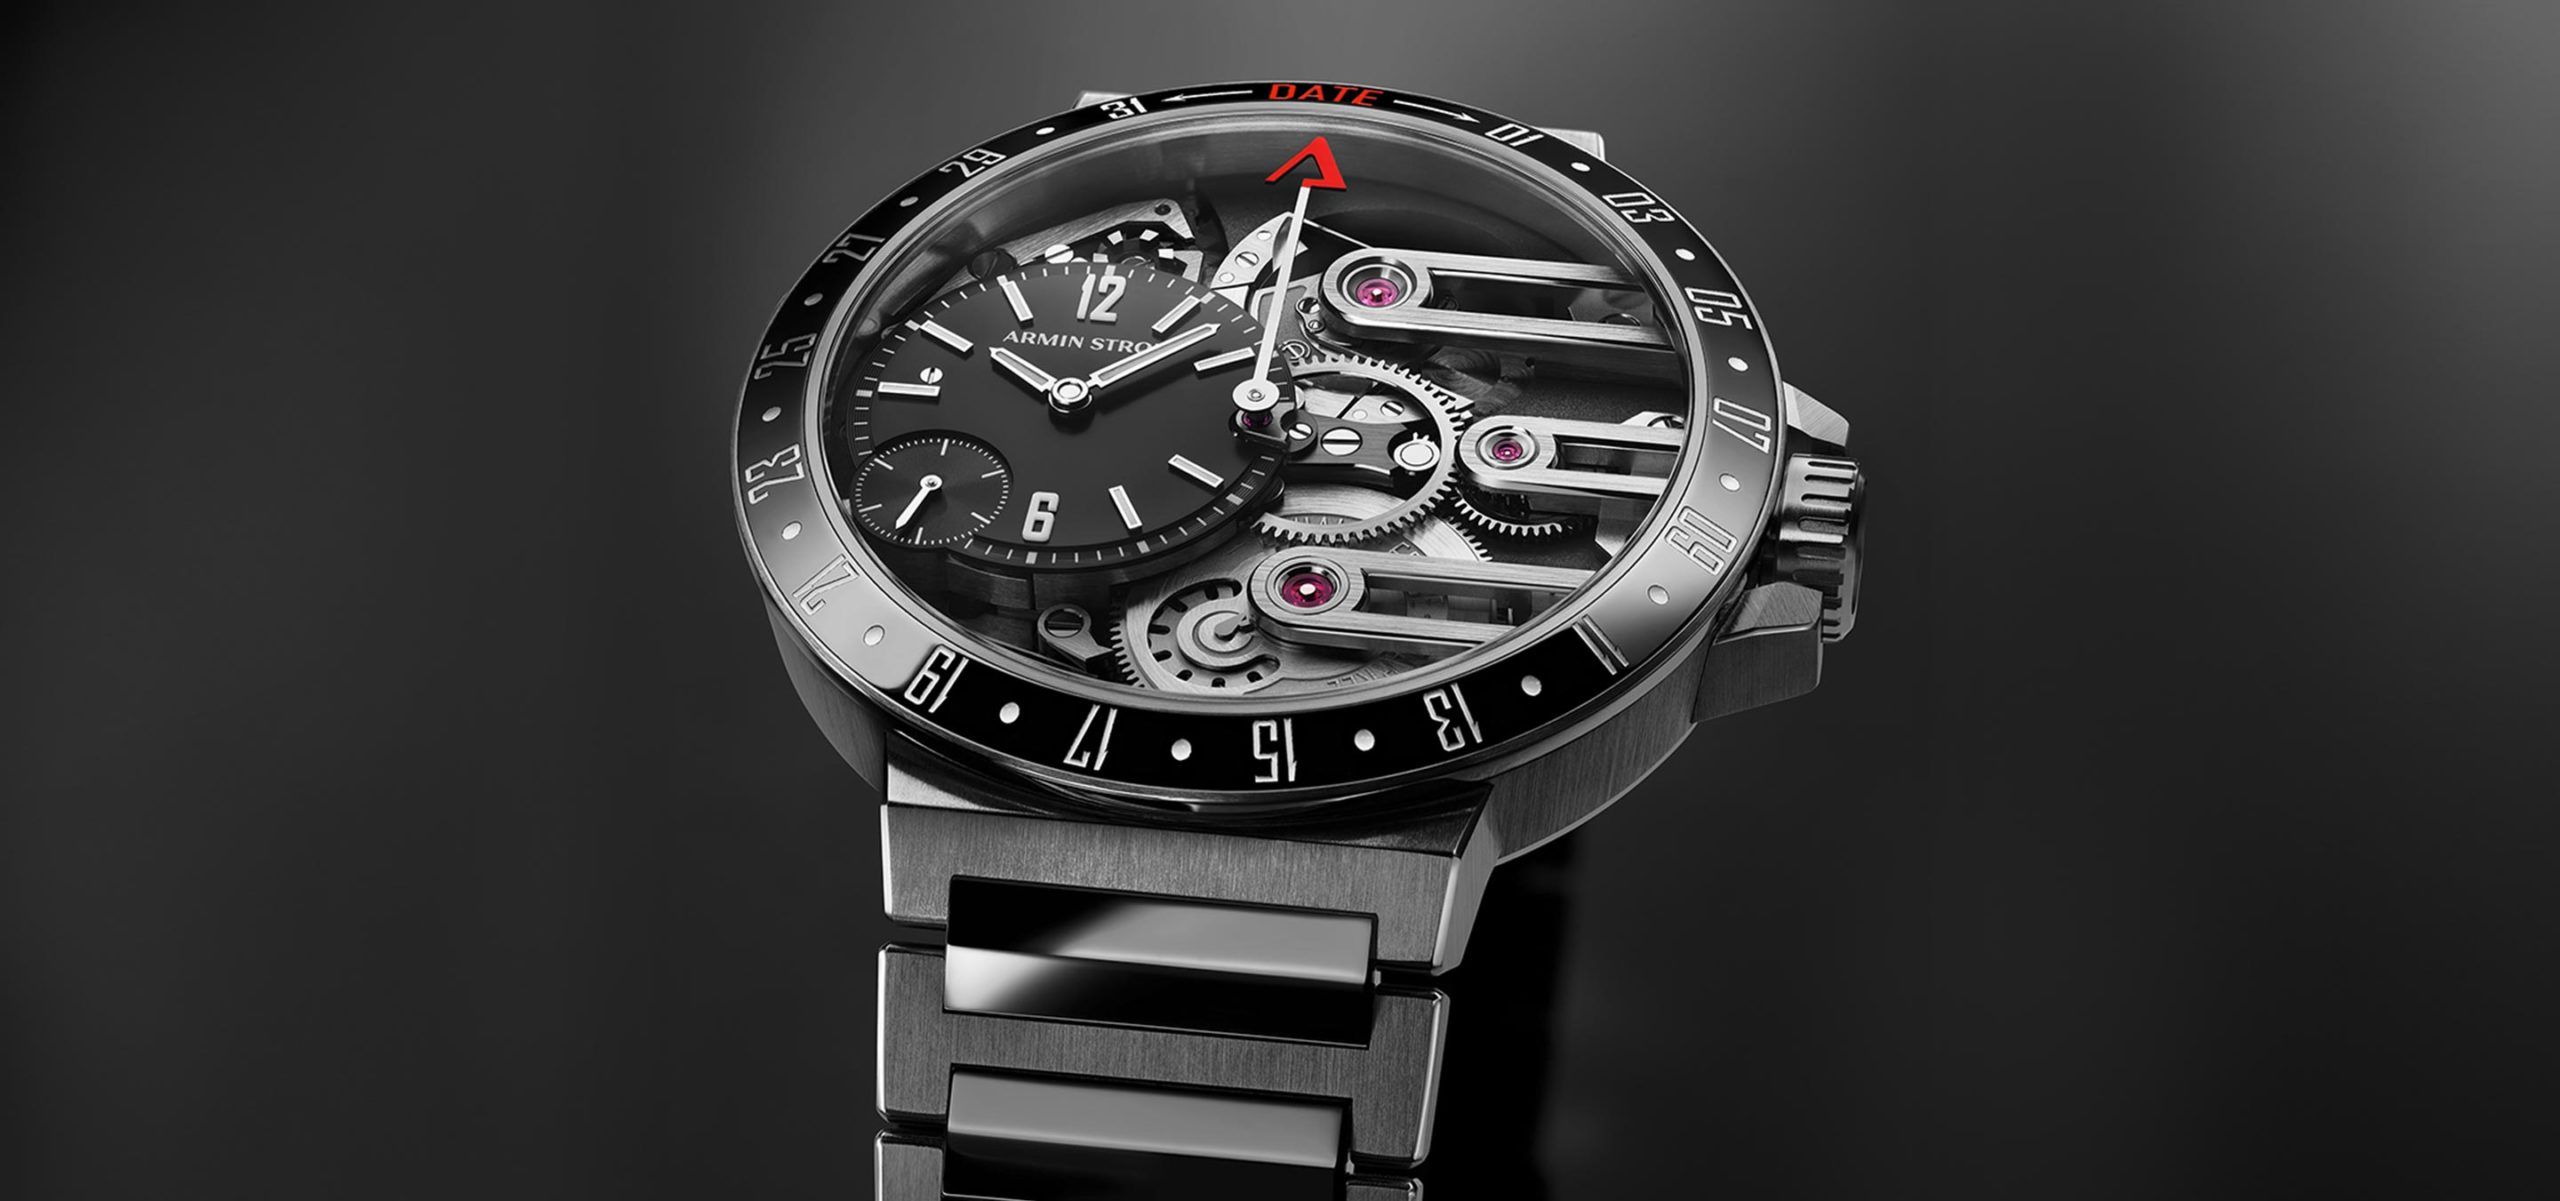 A Date With The Armin Strom Orbit Manufacture Edition: On Demand, On The Bezel